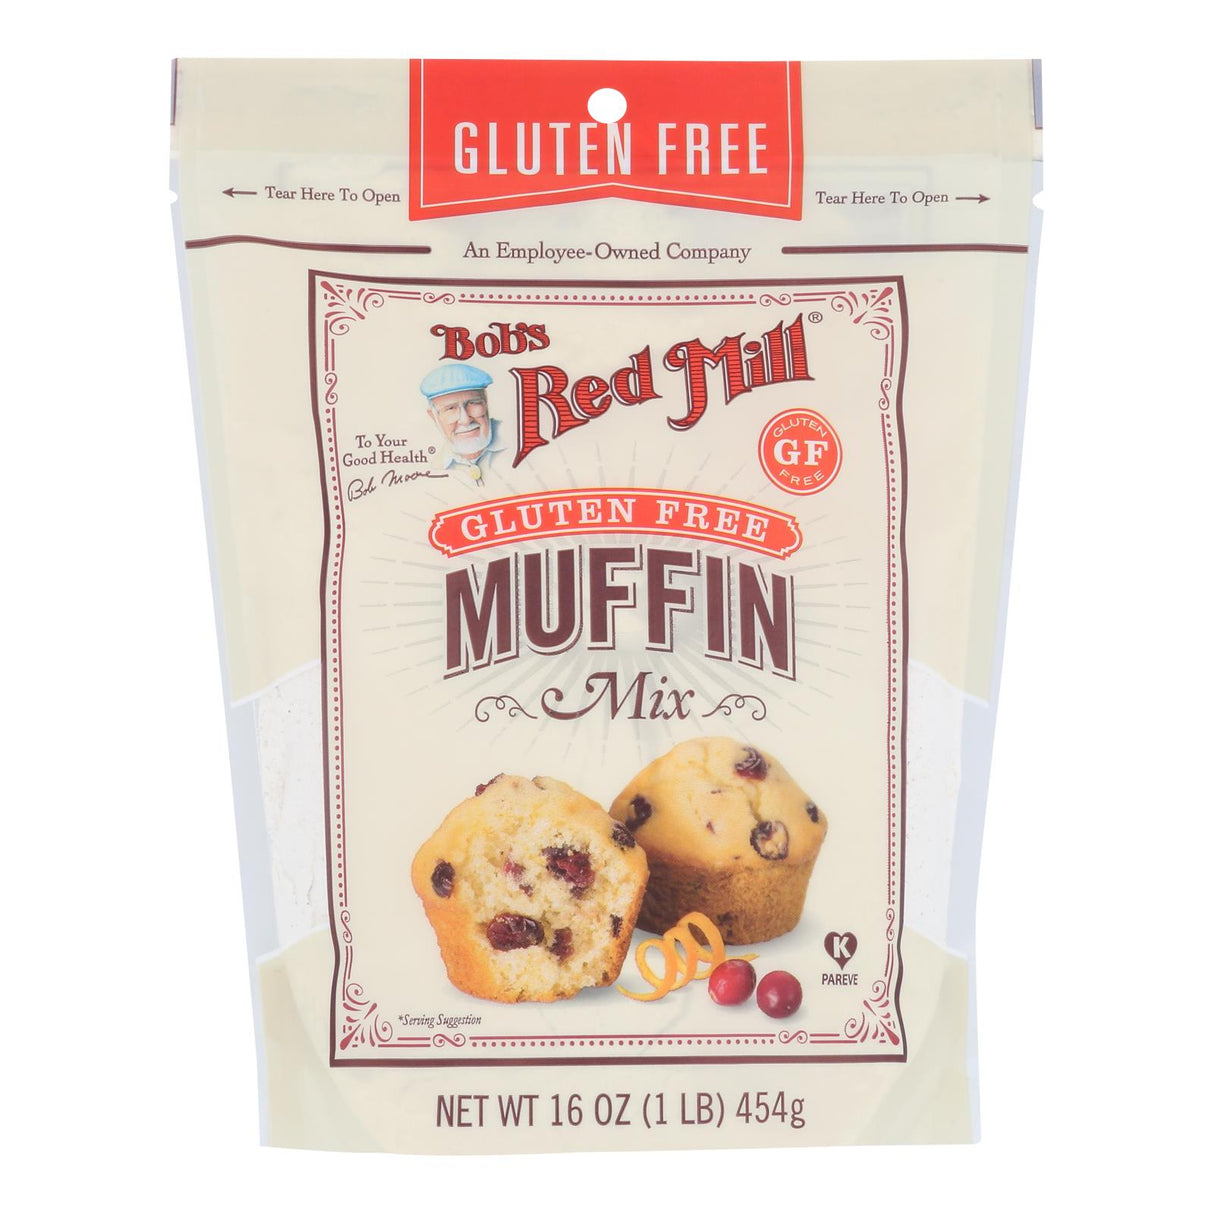 Bob's Red Mill Gluten Free Muffin Mix (Pack of 4 - 16 Oz.) - Cozy Farm 